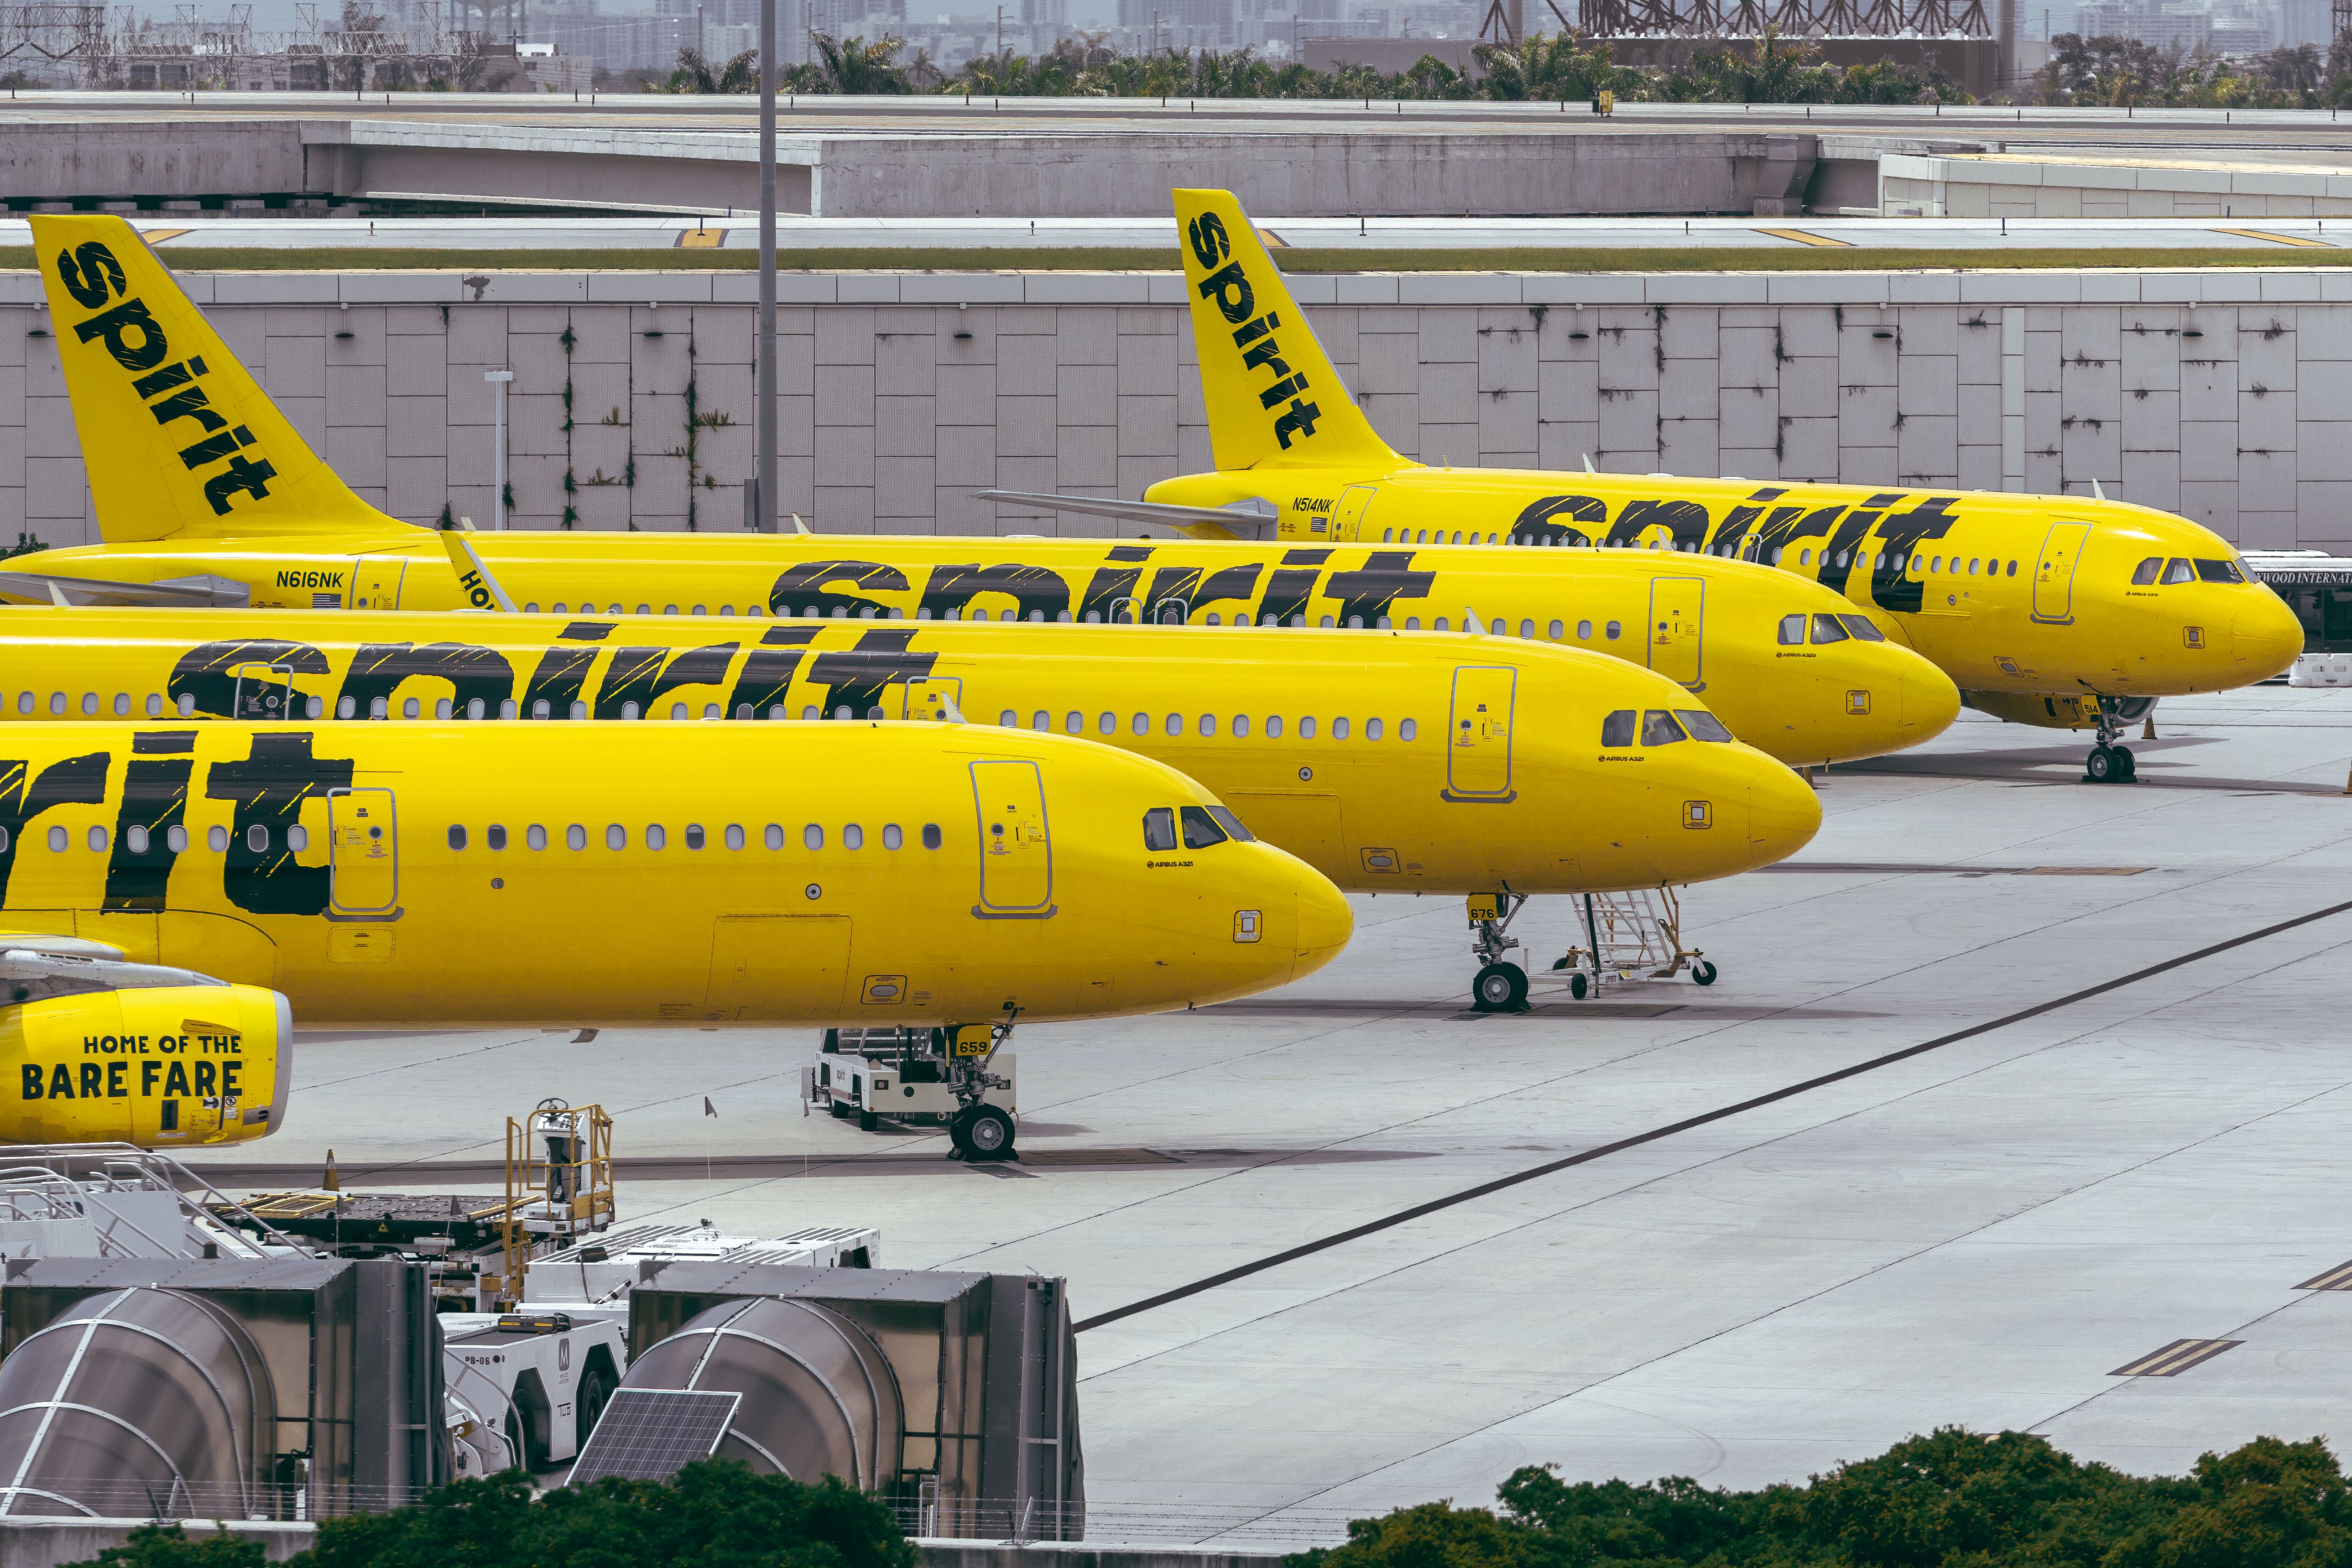 Several Spirit Airlines aircraft parked on the apron at Fort Lauderdale Hollywood International Airport.